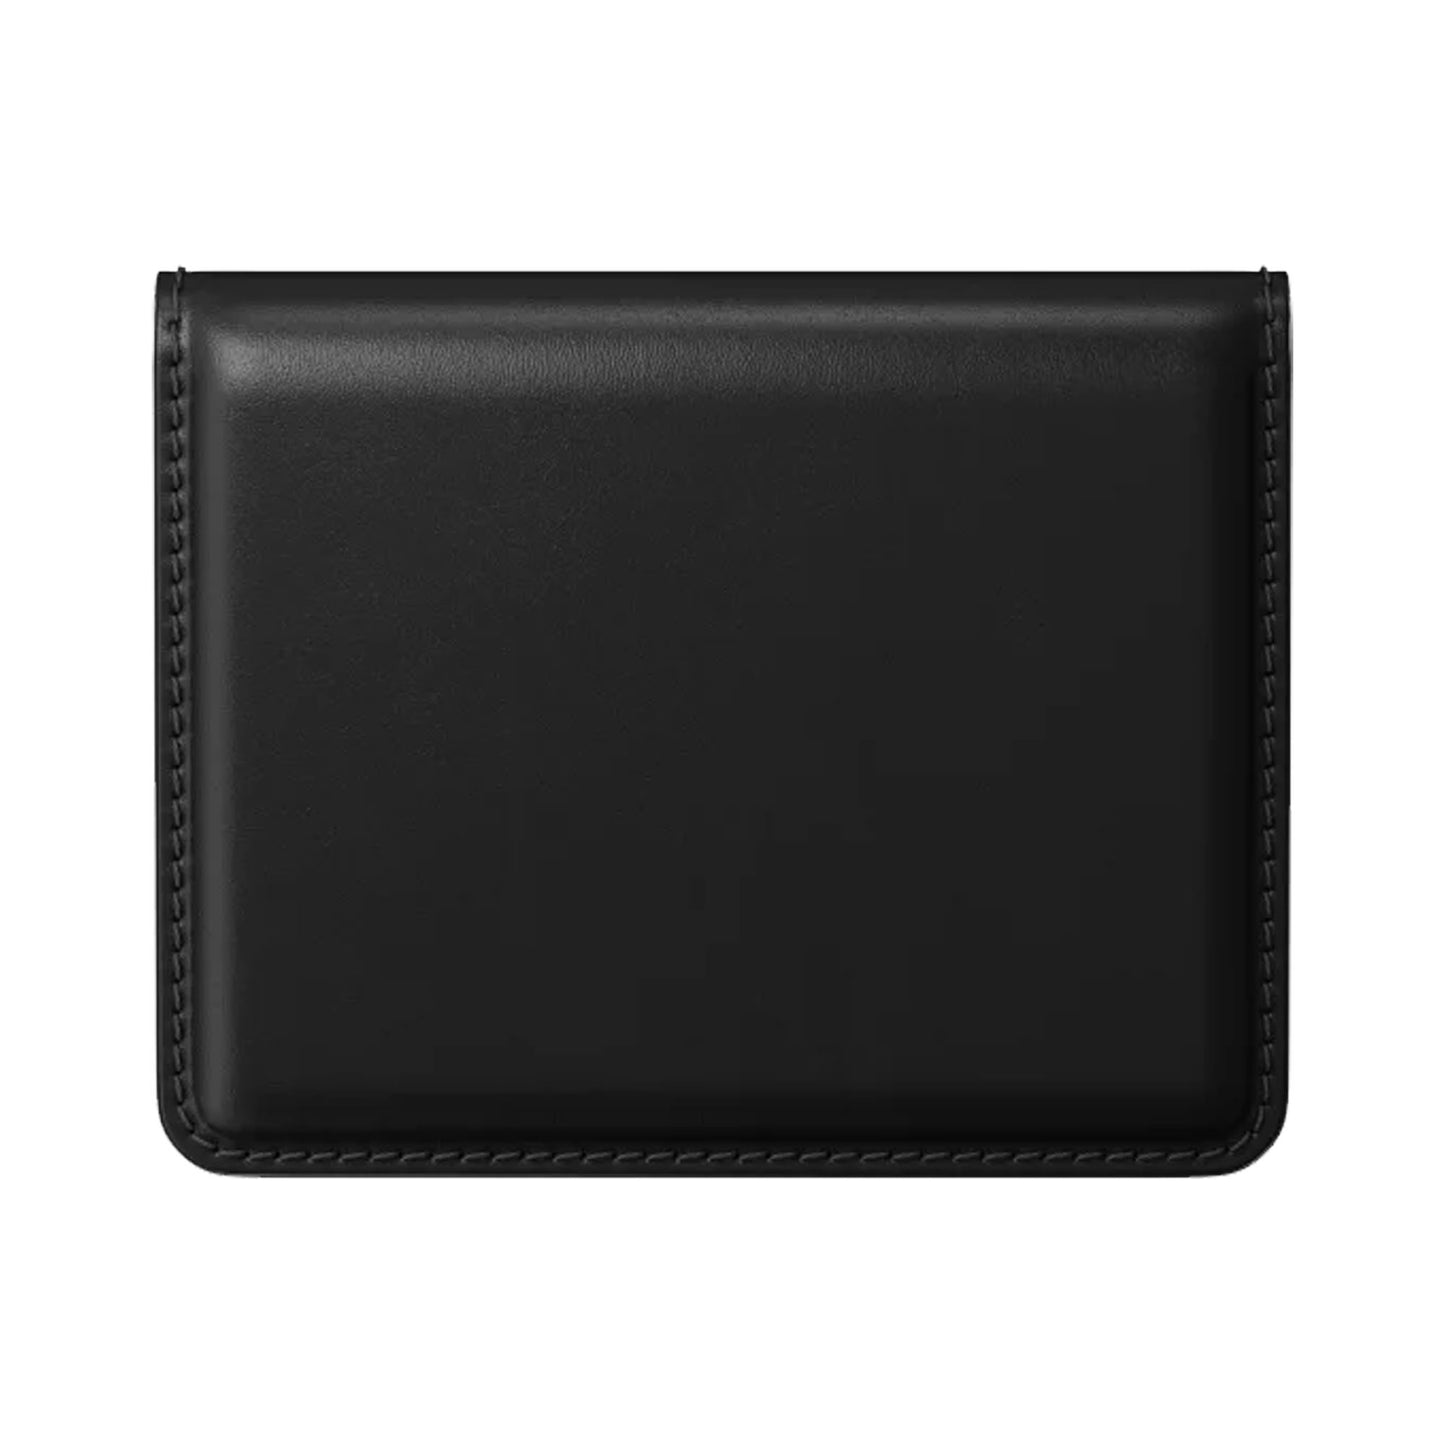 Nomad Card Wallet Plus Horween Leather - Black ( Barcode: 856500019536 )